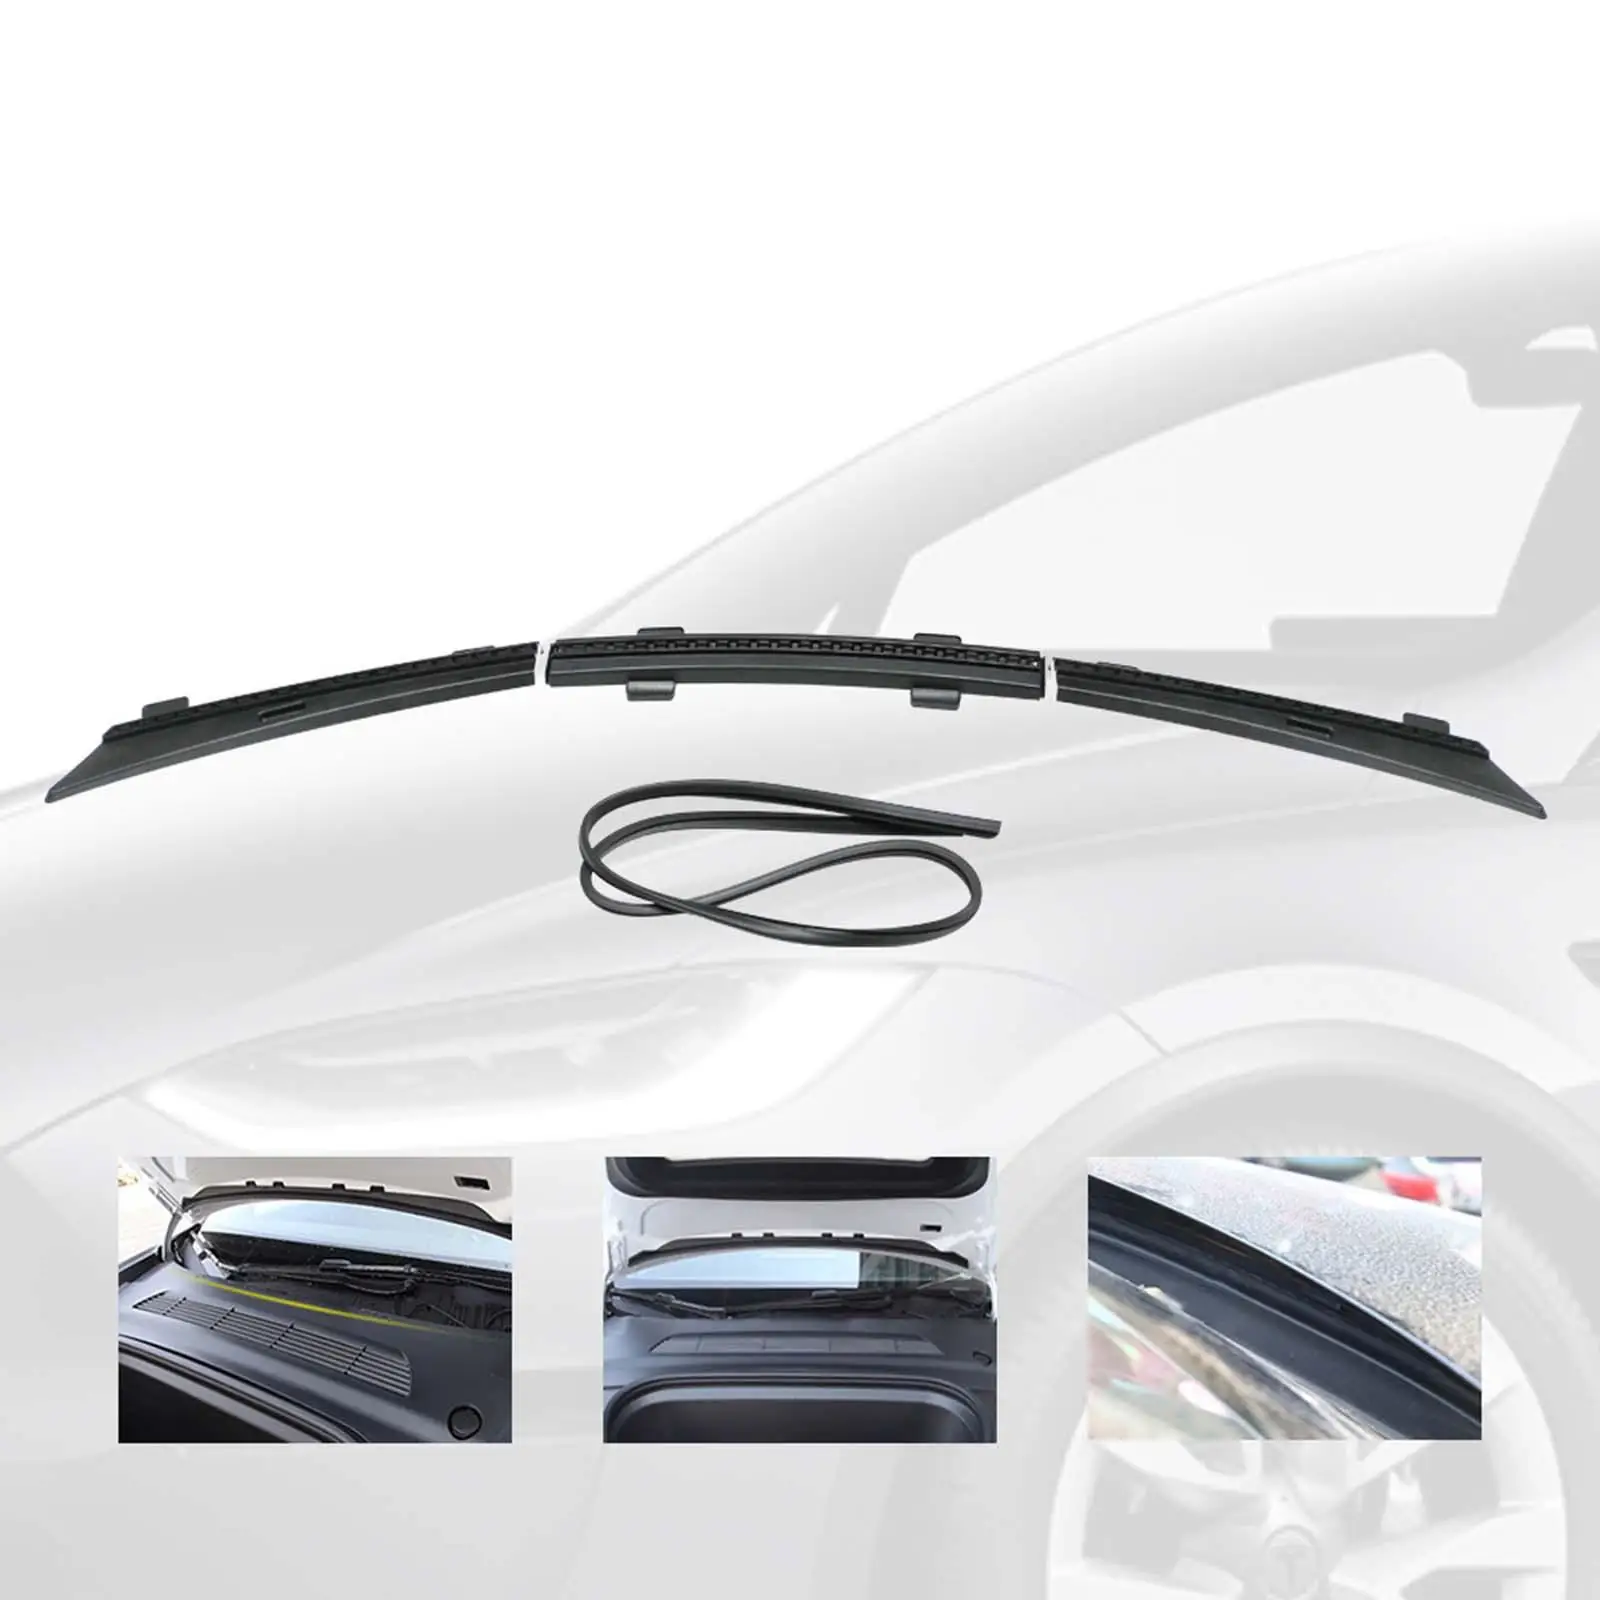 Car Front Hood Cover Water Strip Engine Cover Seal Trim Air Vent Intake Protect Modification Parts for Tesla Model 3